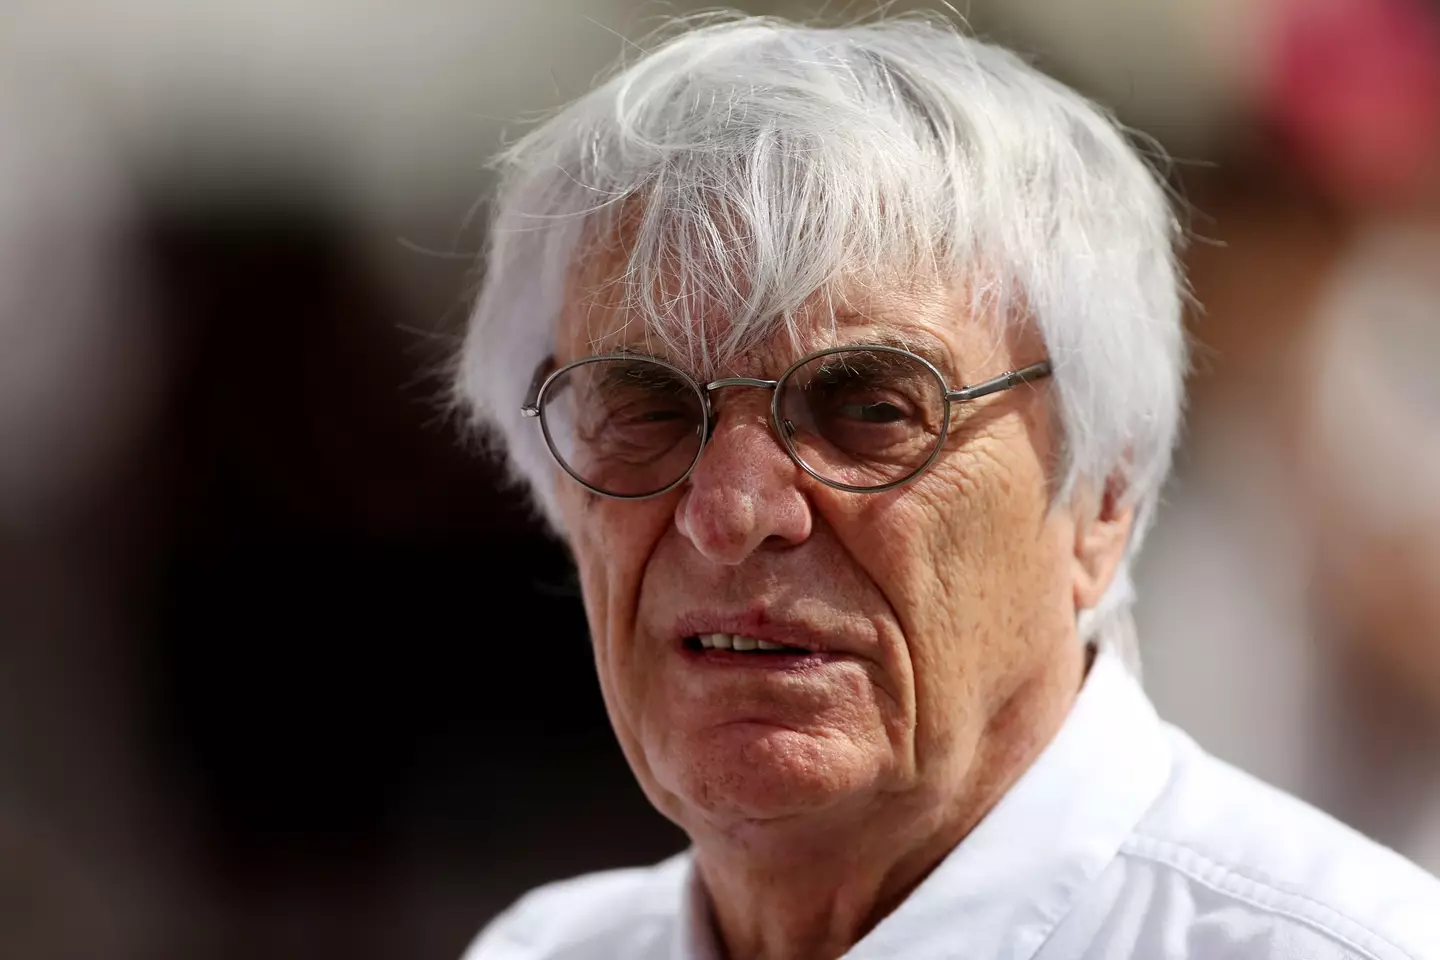 Ecclestone was arrested in Brazil on Wednesday (Image: PA)